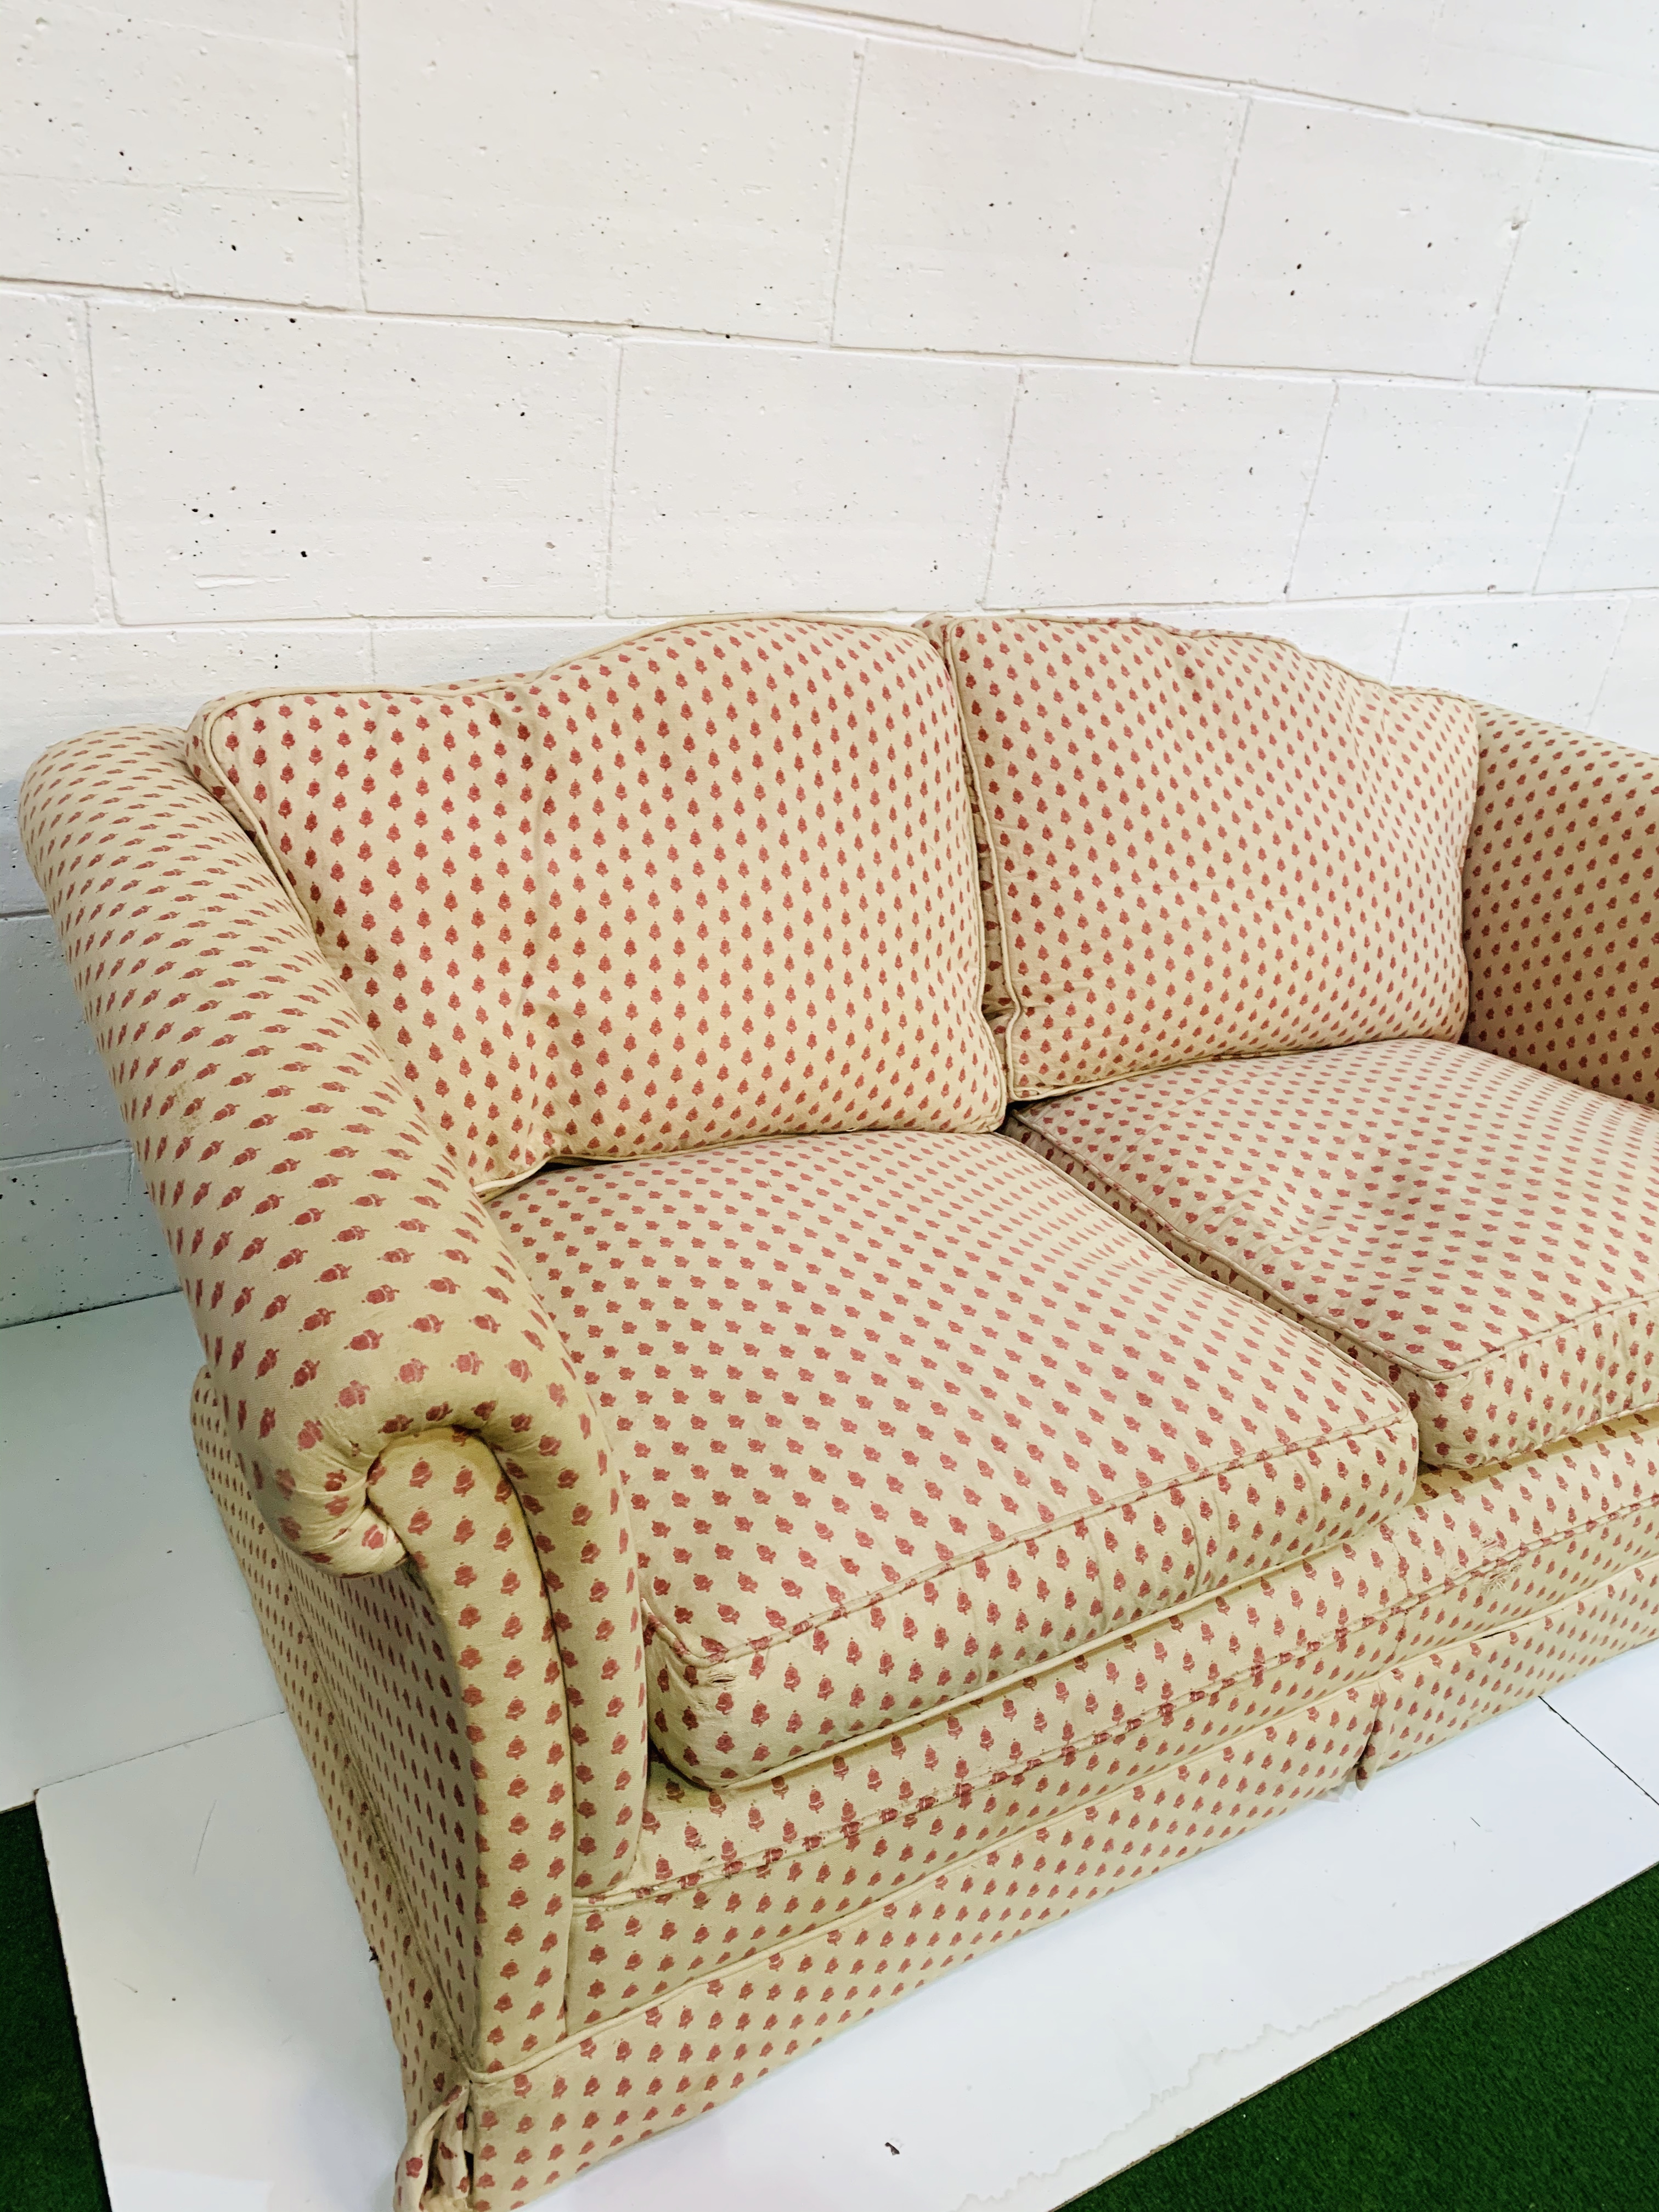 Cream and pink upholstered sofa withfeather-filled cushions. - Image 2 of 4